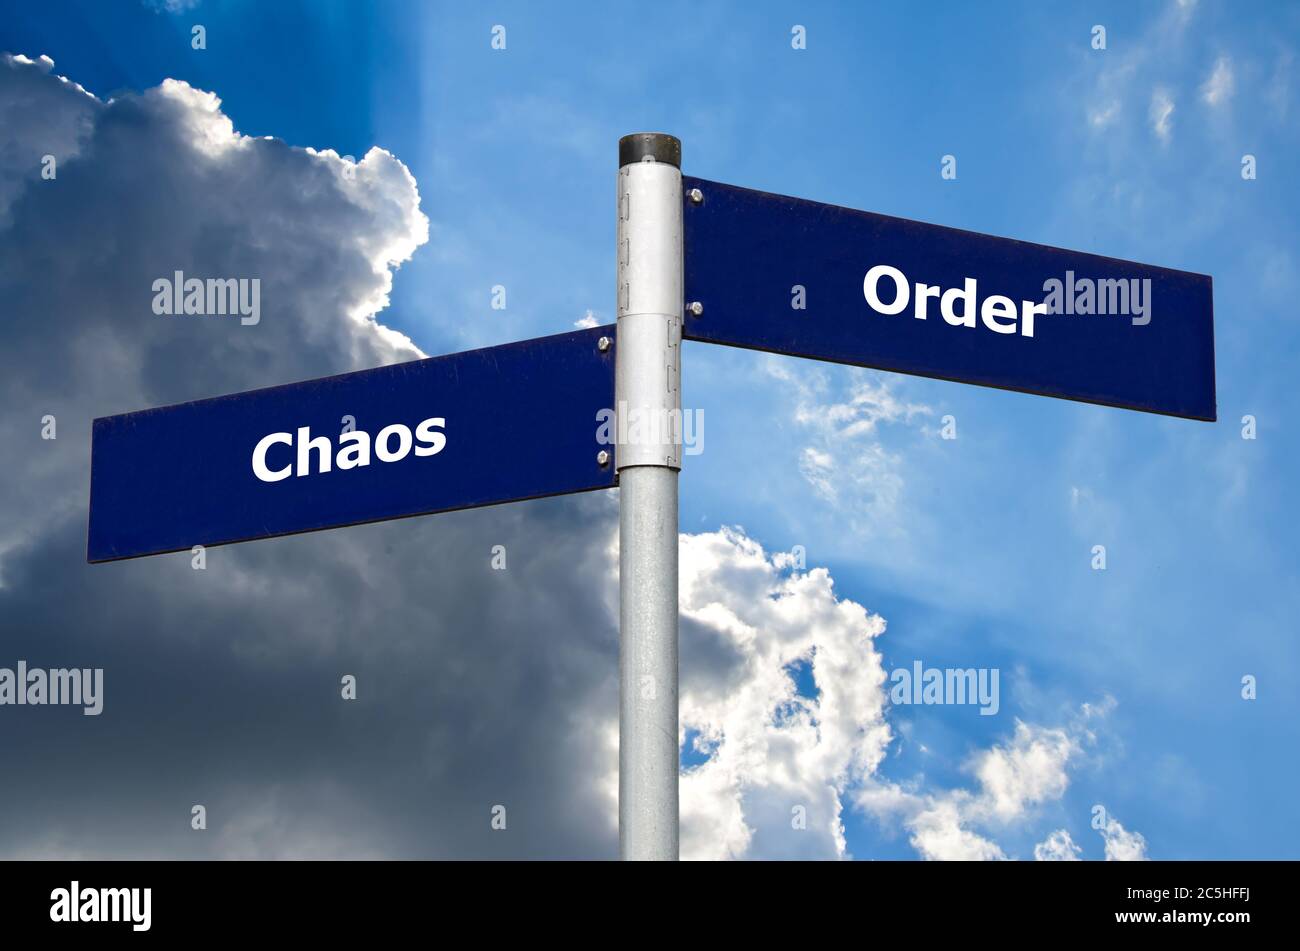 Street sign in front of dark clouds symbolizing contrast between 'chaos' and 'order' Stock Photo